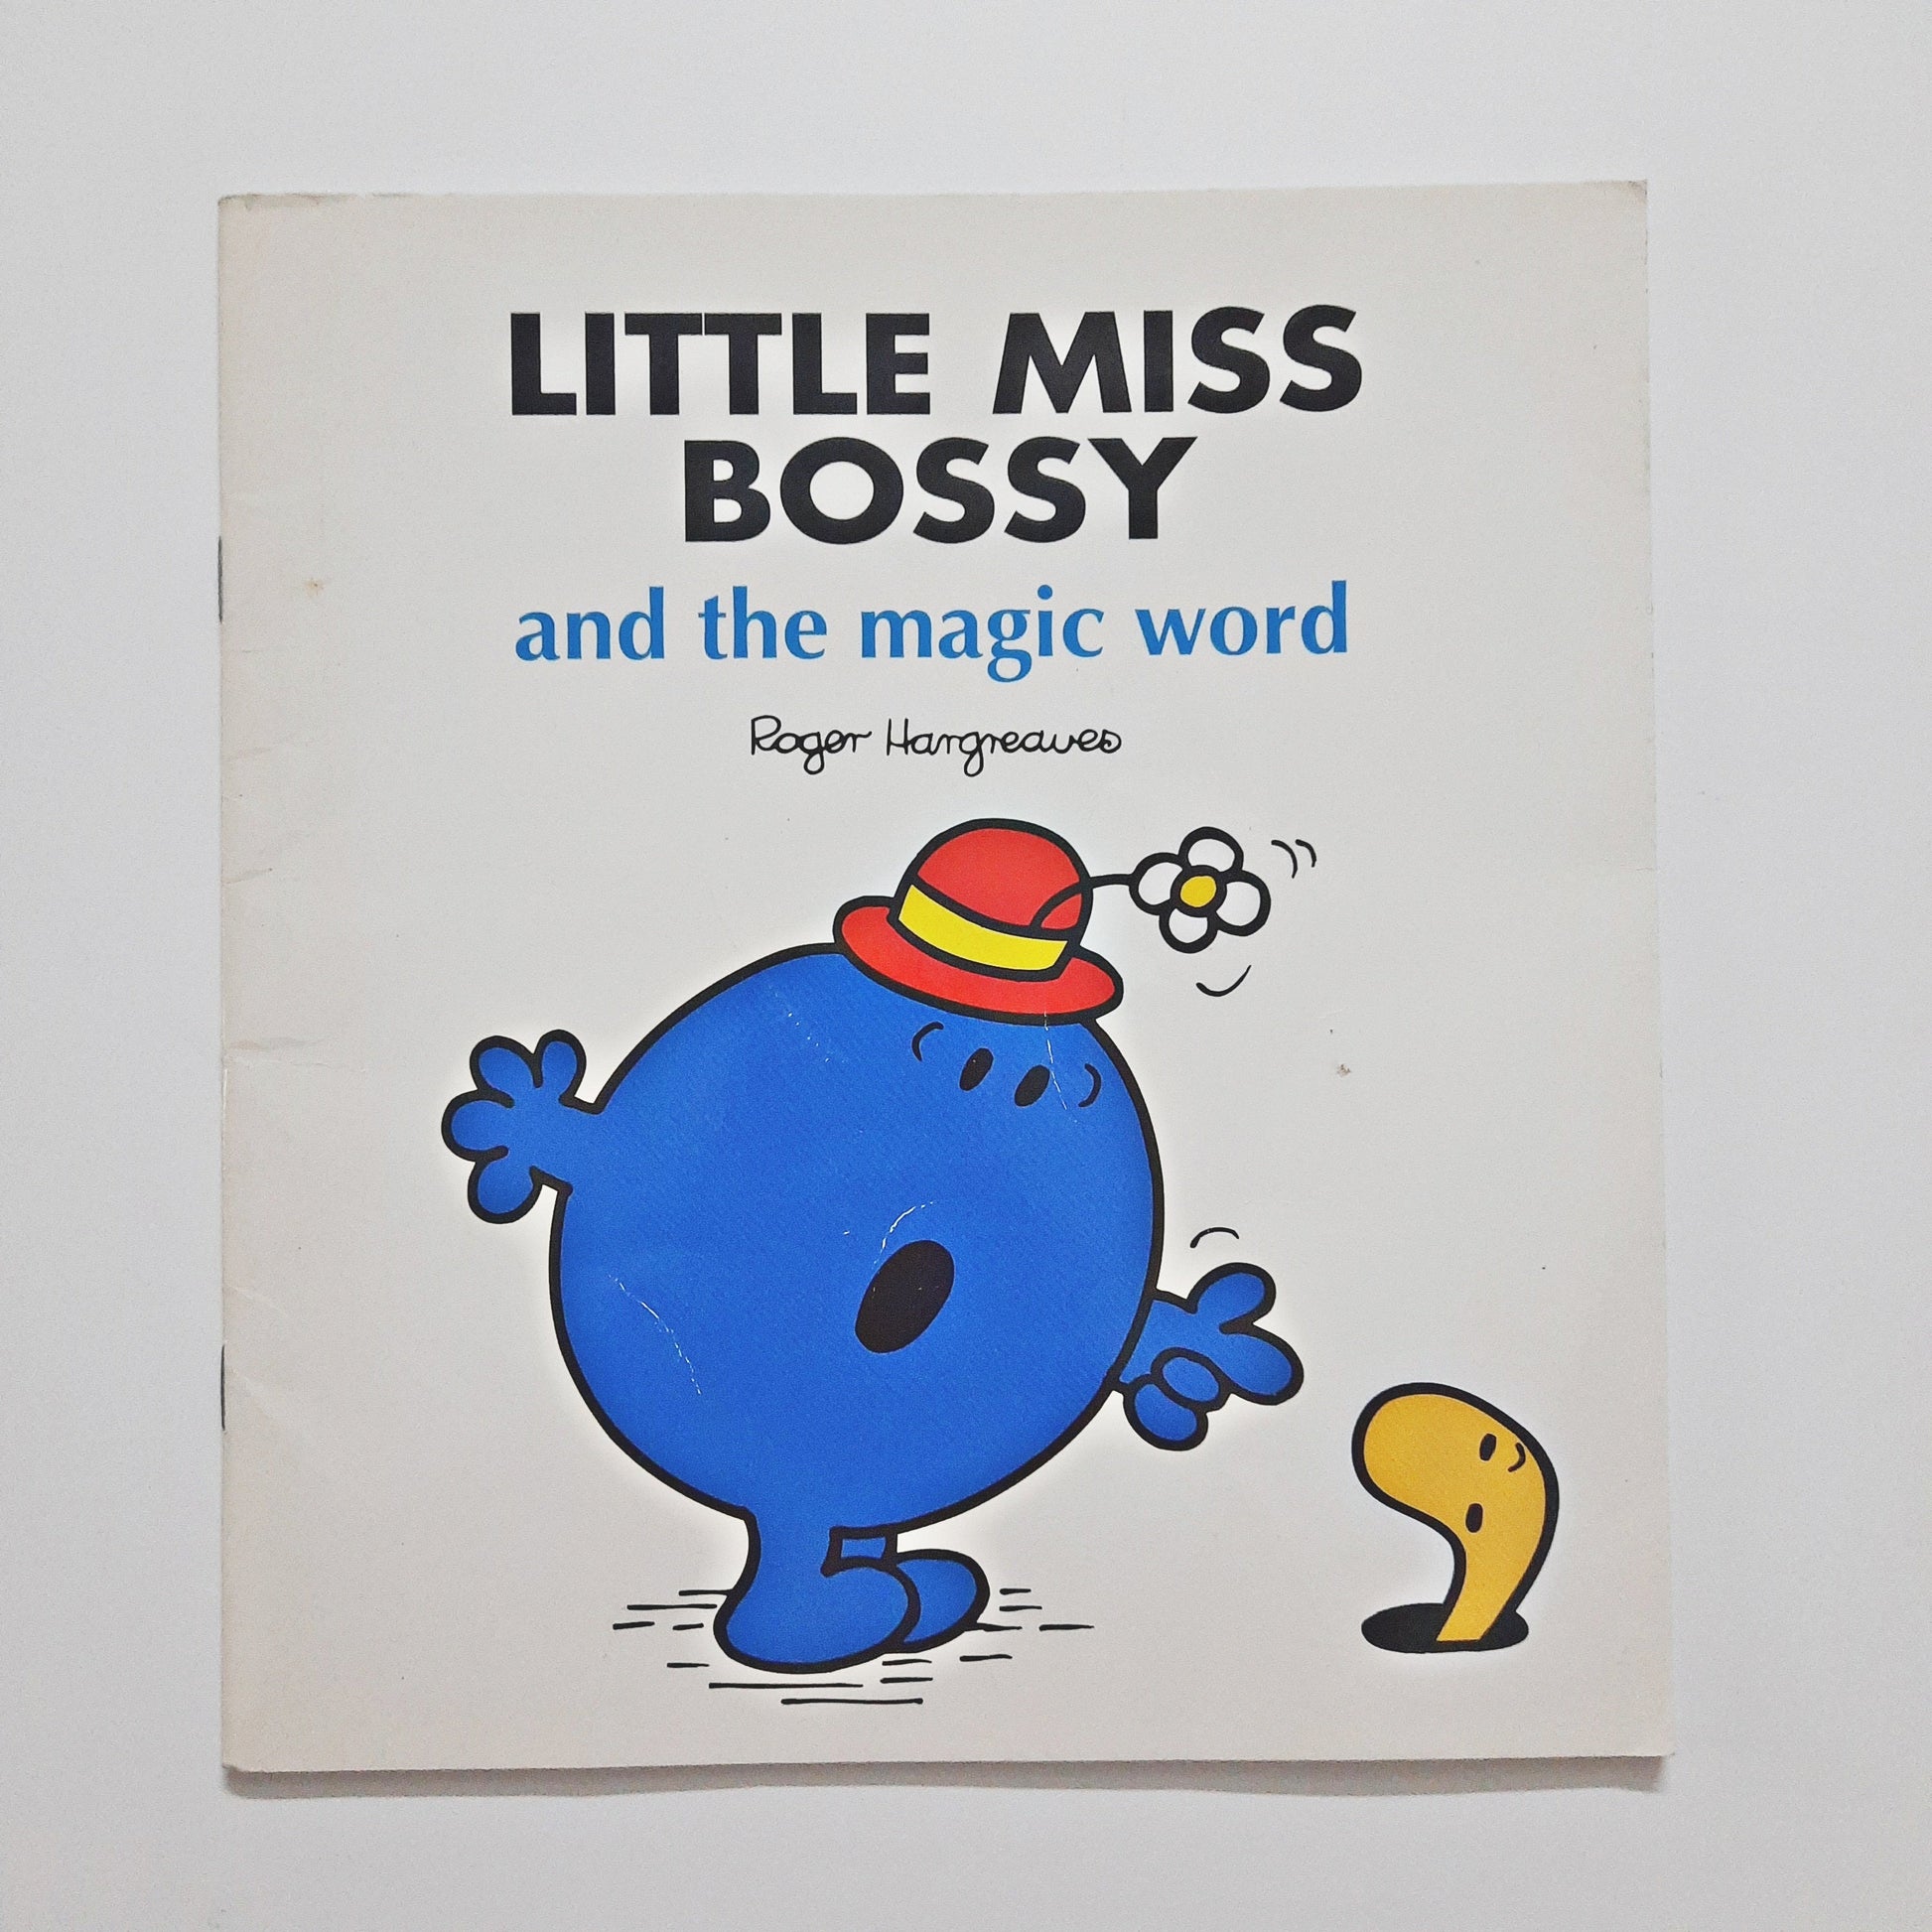 Little Miss Bossy and the Magical Word